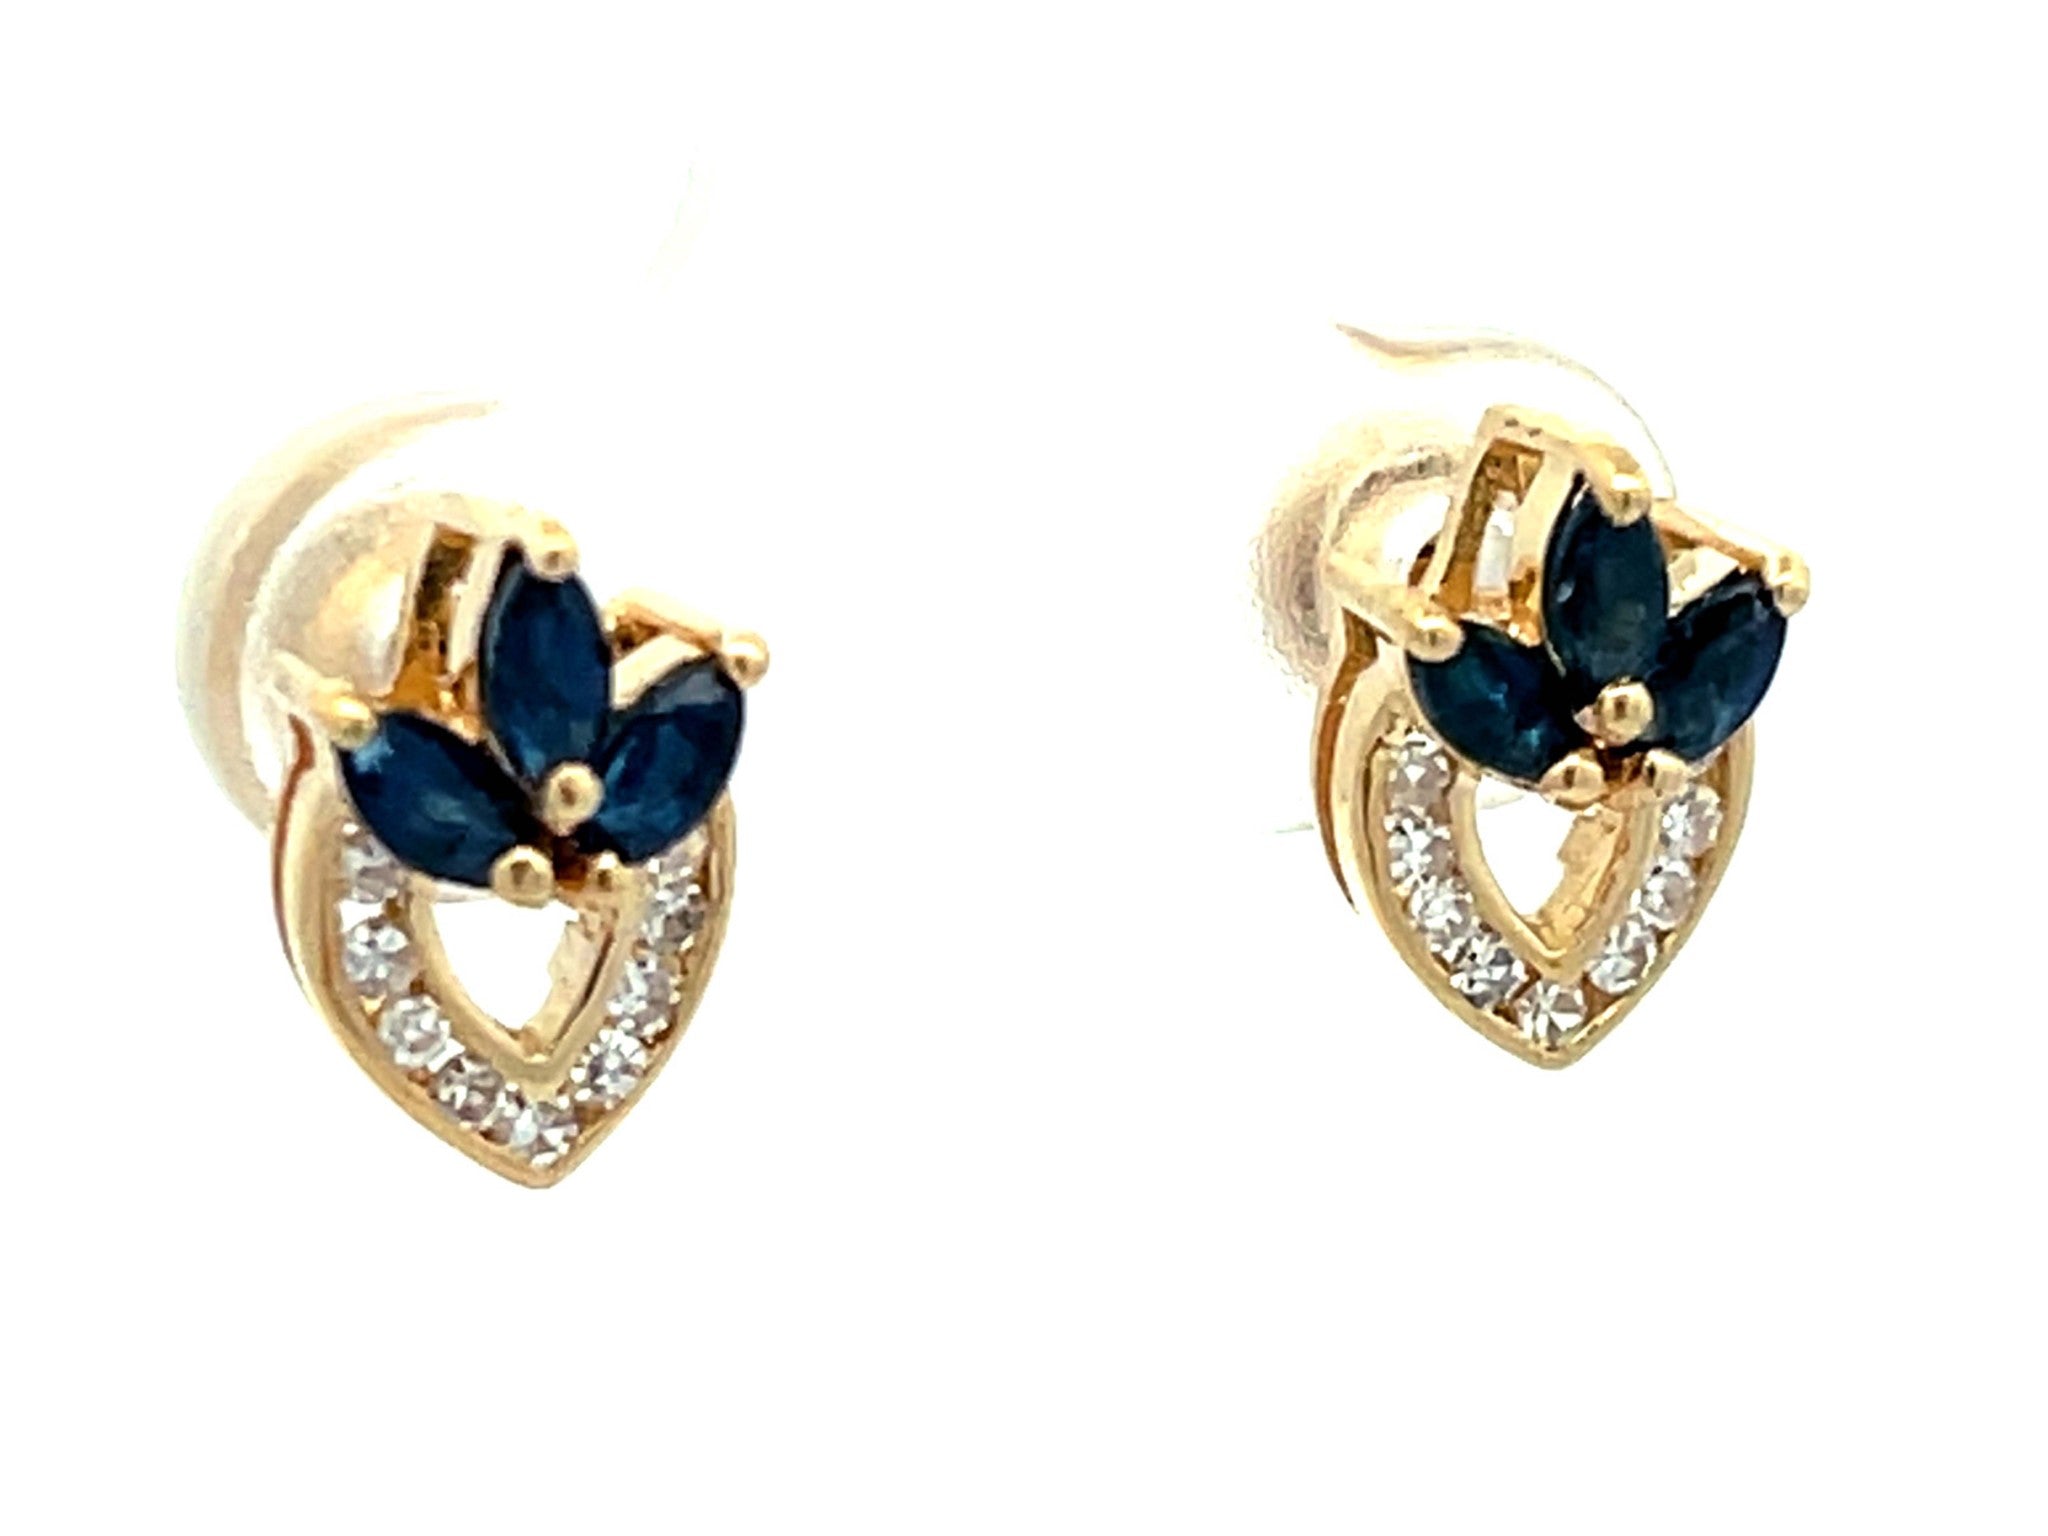 Marquise Sapphire and Diamond Earrings in 14K Yellow Gold